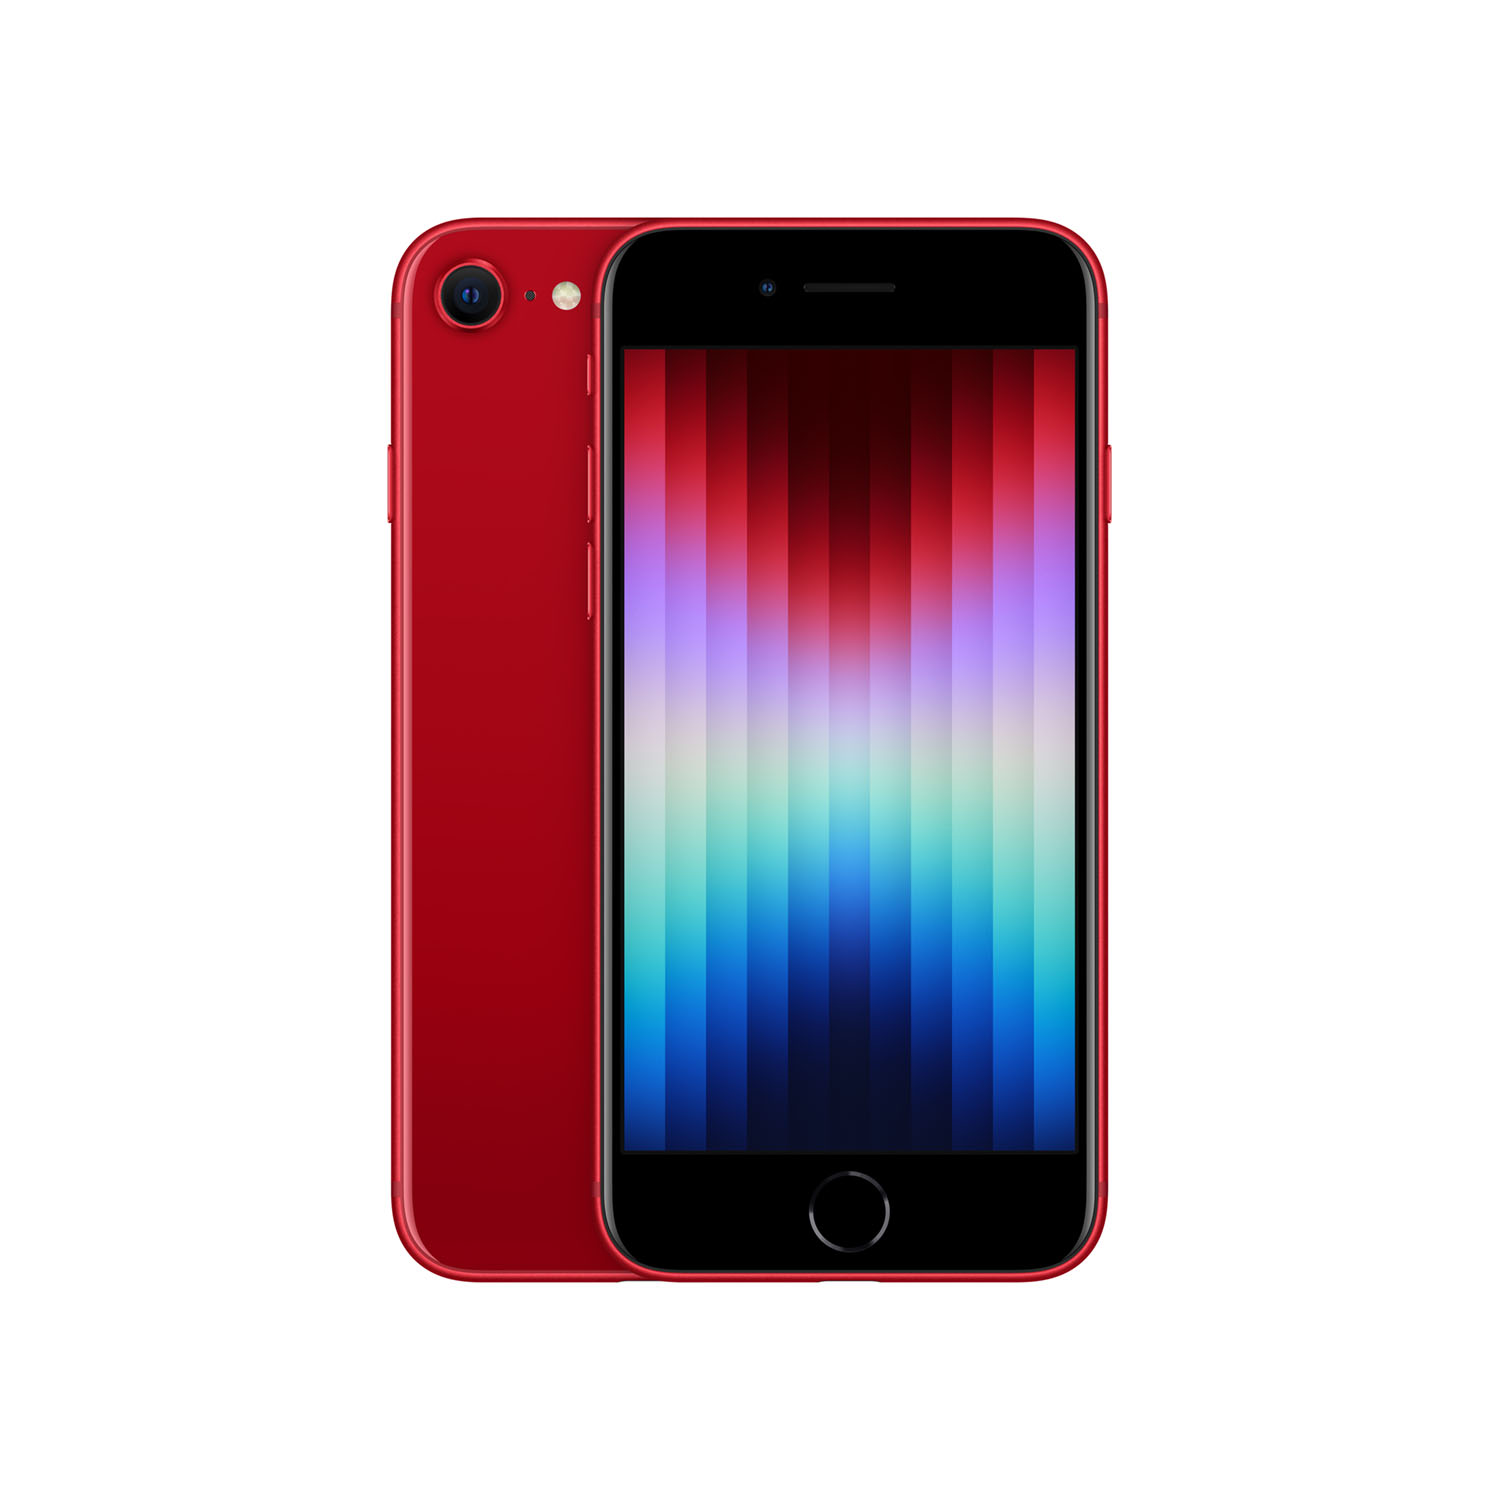 Apple iPhone SE 64GB - (PRODUCT)Red